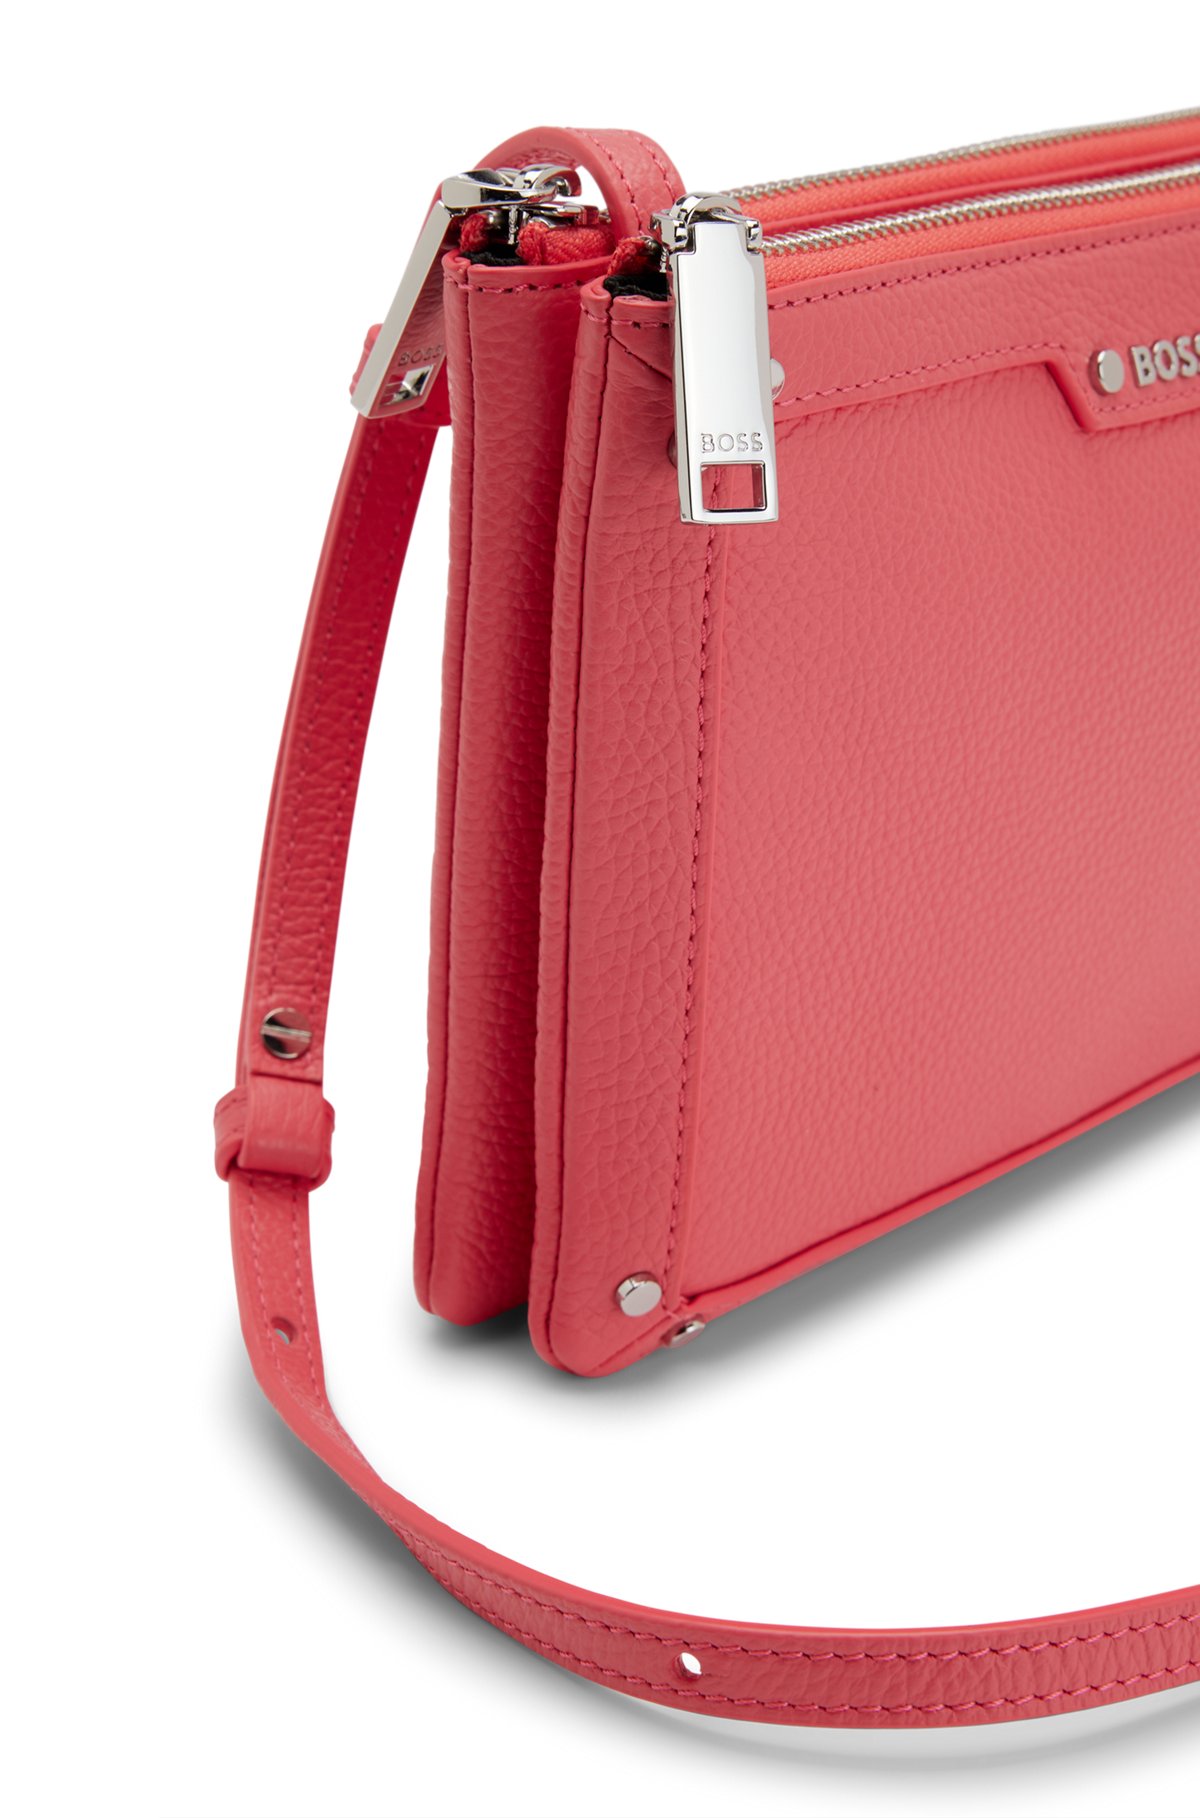 BOSS - Grained-leather crossbody bag with logo lettering